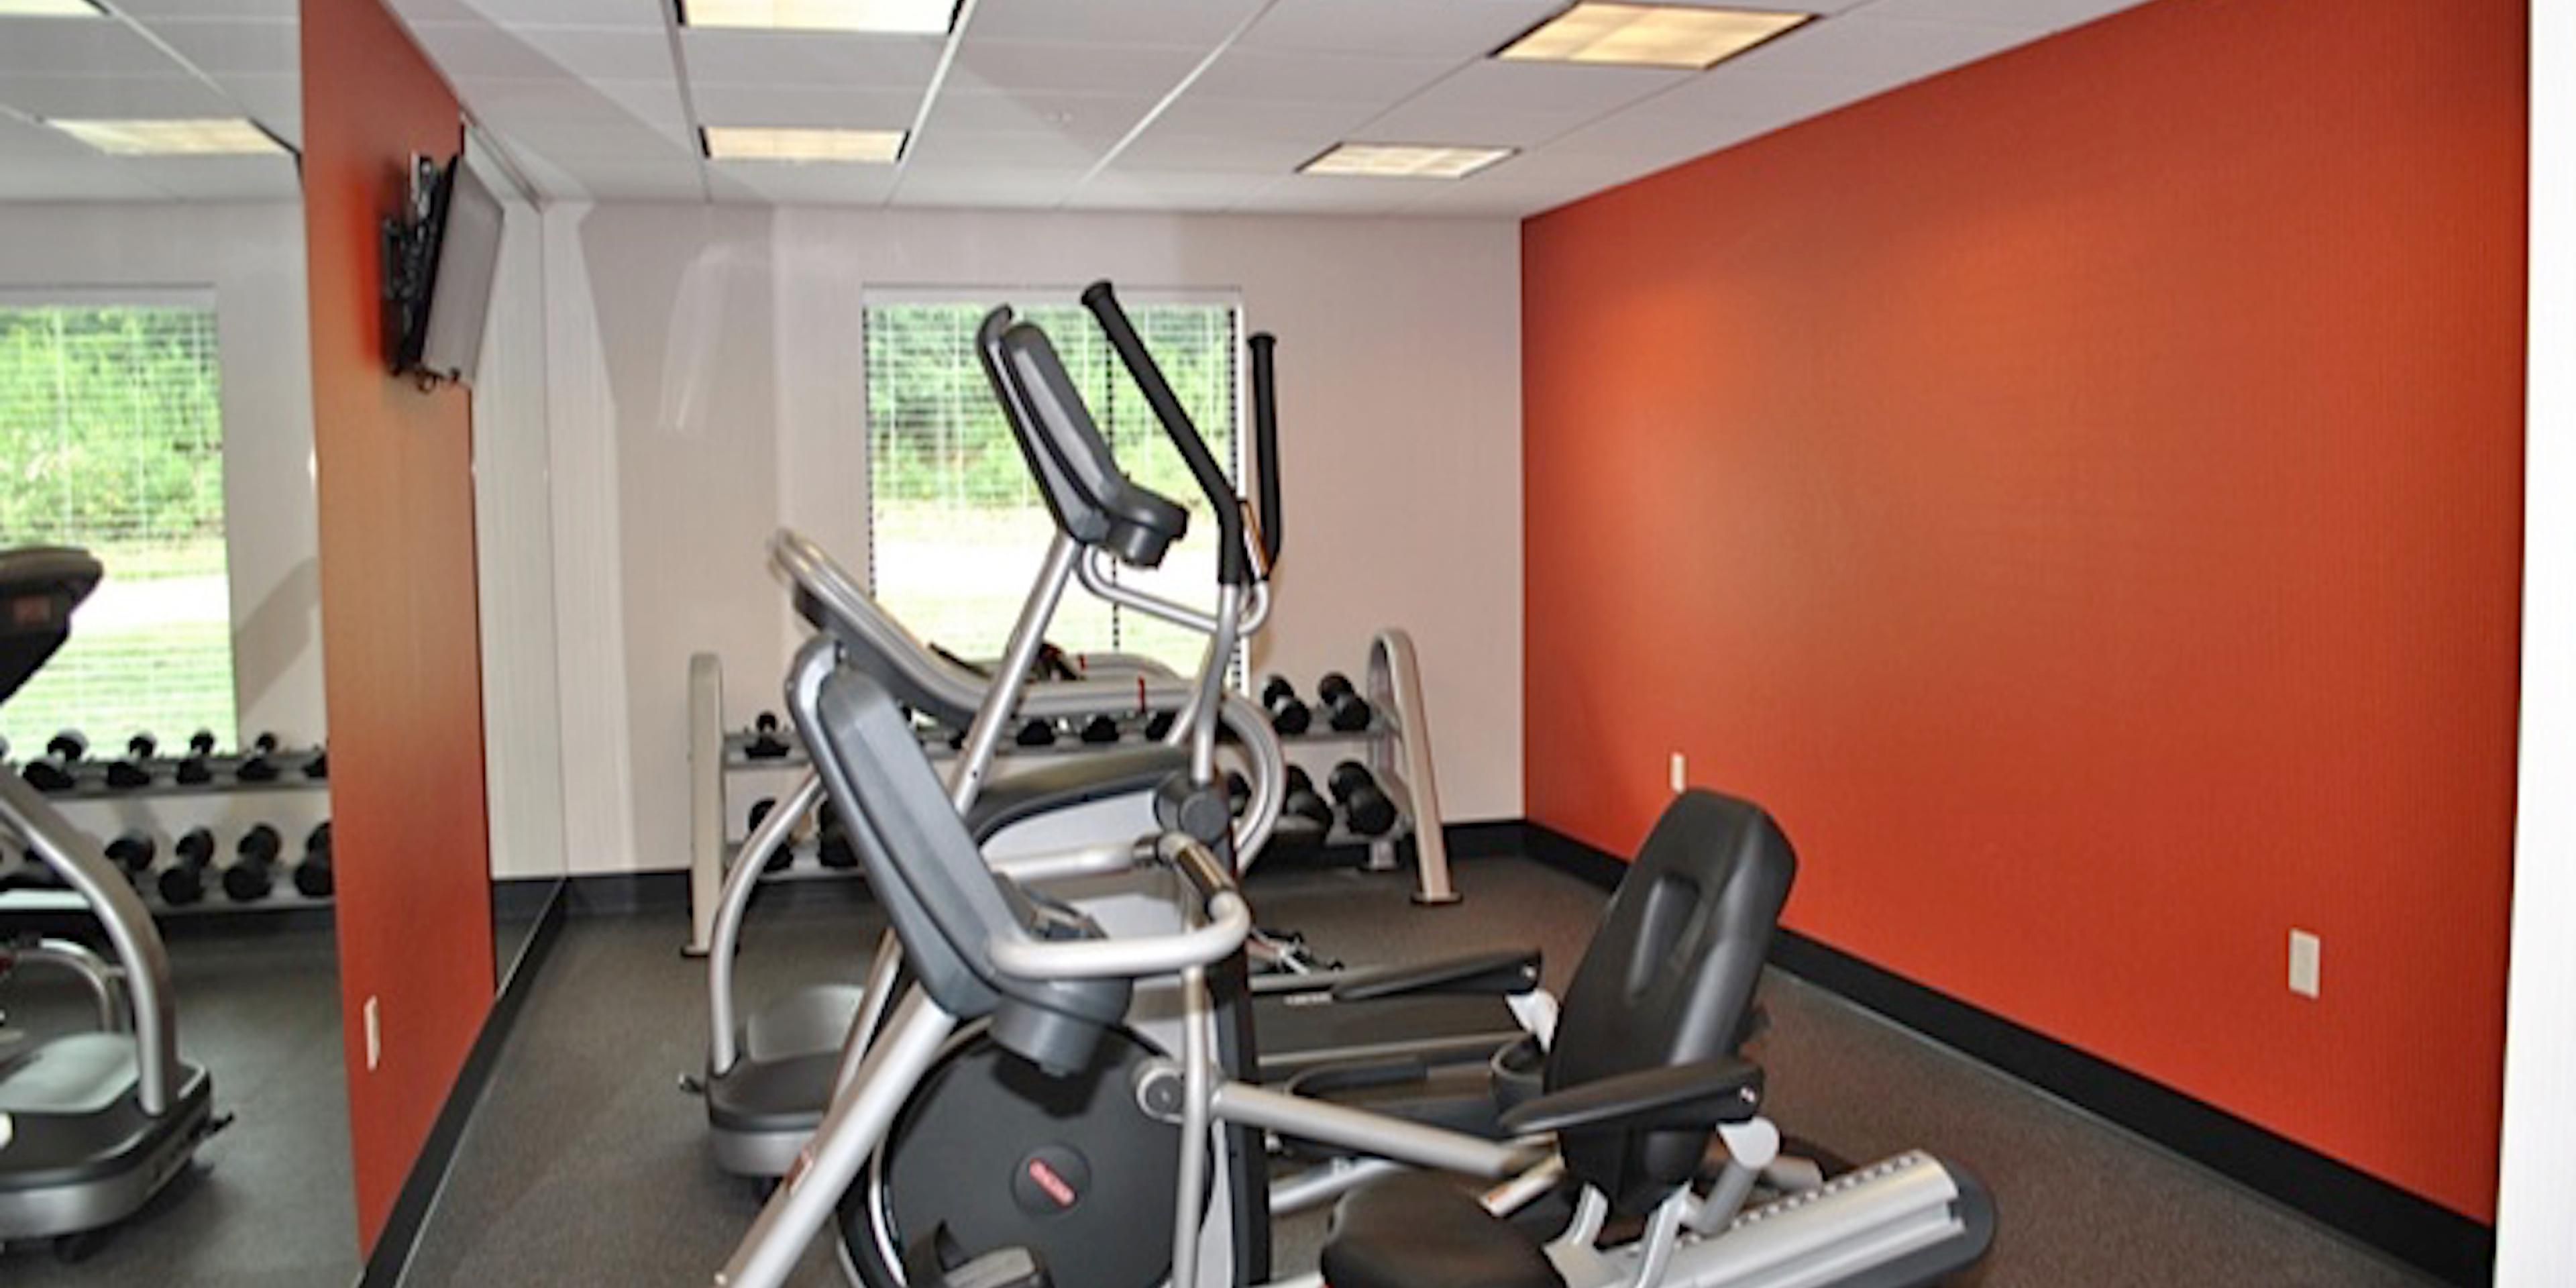 Every guest can enjoy our complimentary 24 hour fitness center while staying with us! Our fitness center features the newest equipment with built in fans, a flat screen TV, a weight bench with free weights & multiple, multiple other exercise tools and complimentary ear buds upon request.